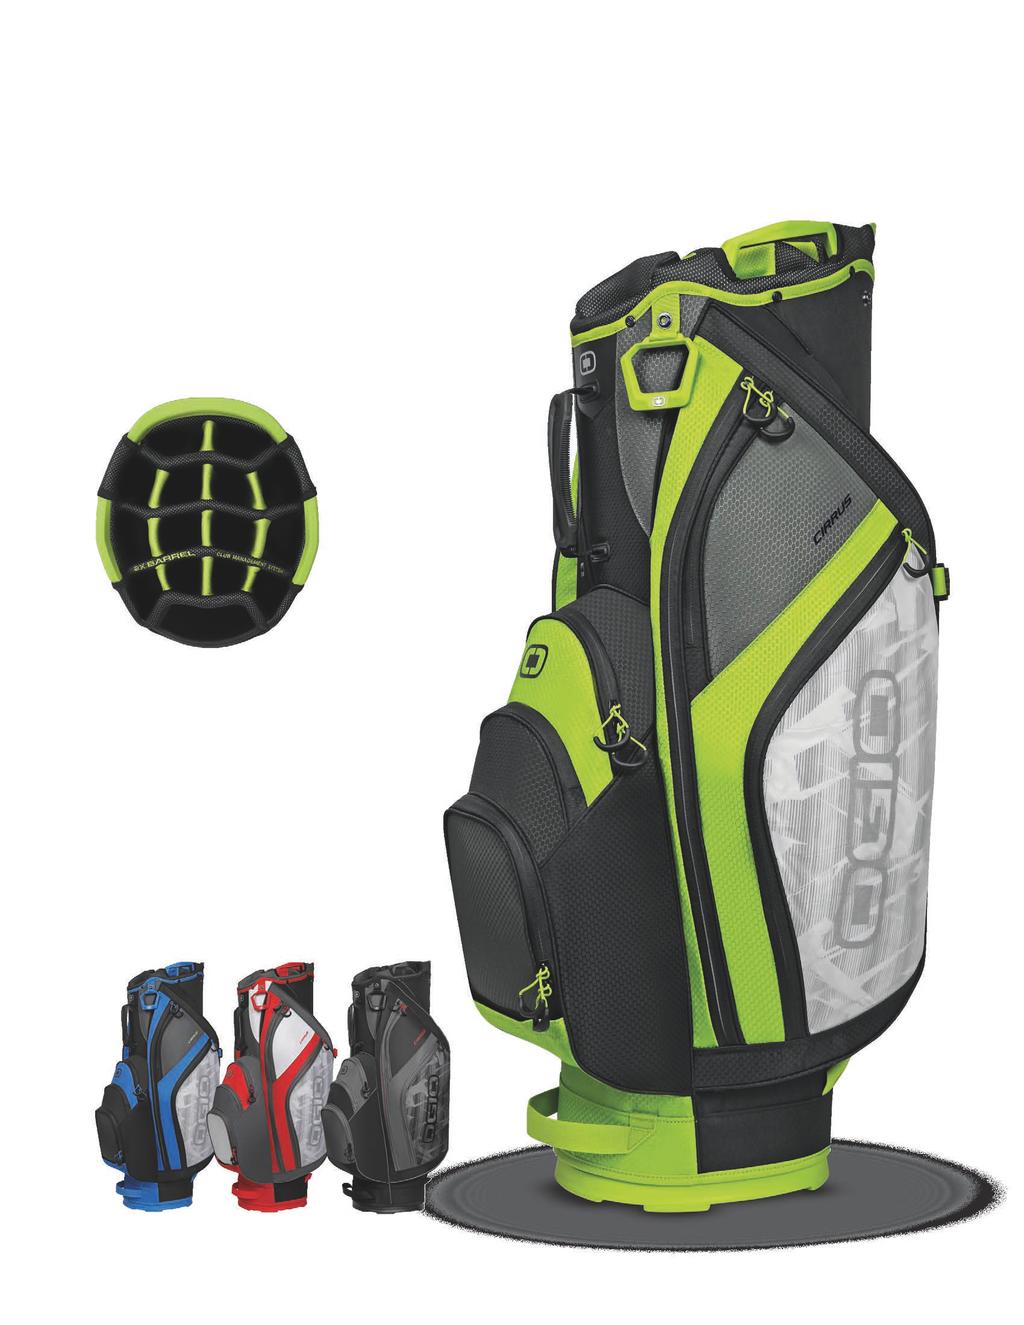 CIRRUS ST YLE:124062 [CART] OGIO s lightest weight cart bag is loaded with features and light as a cloud.